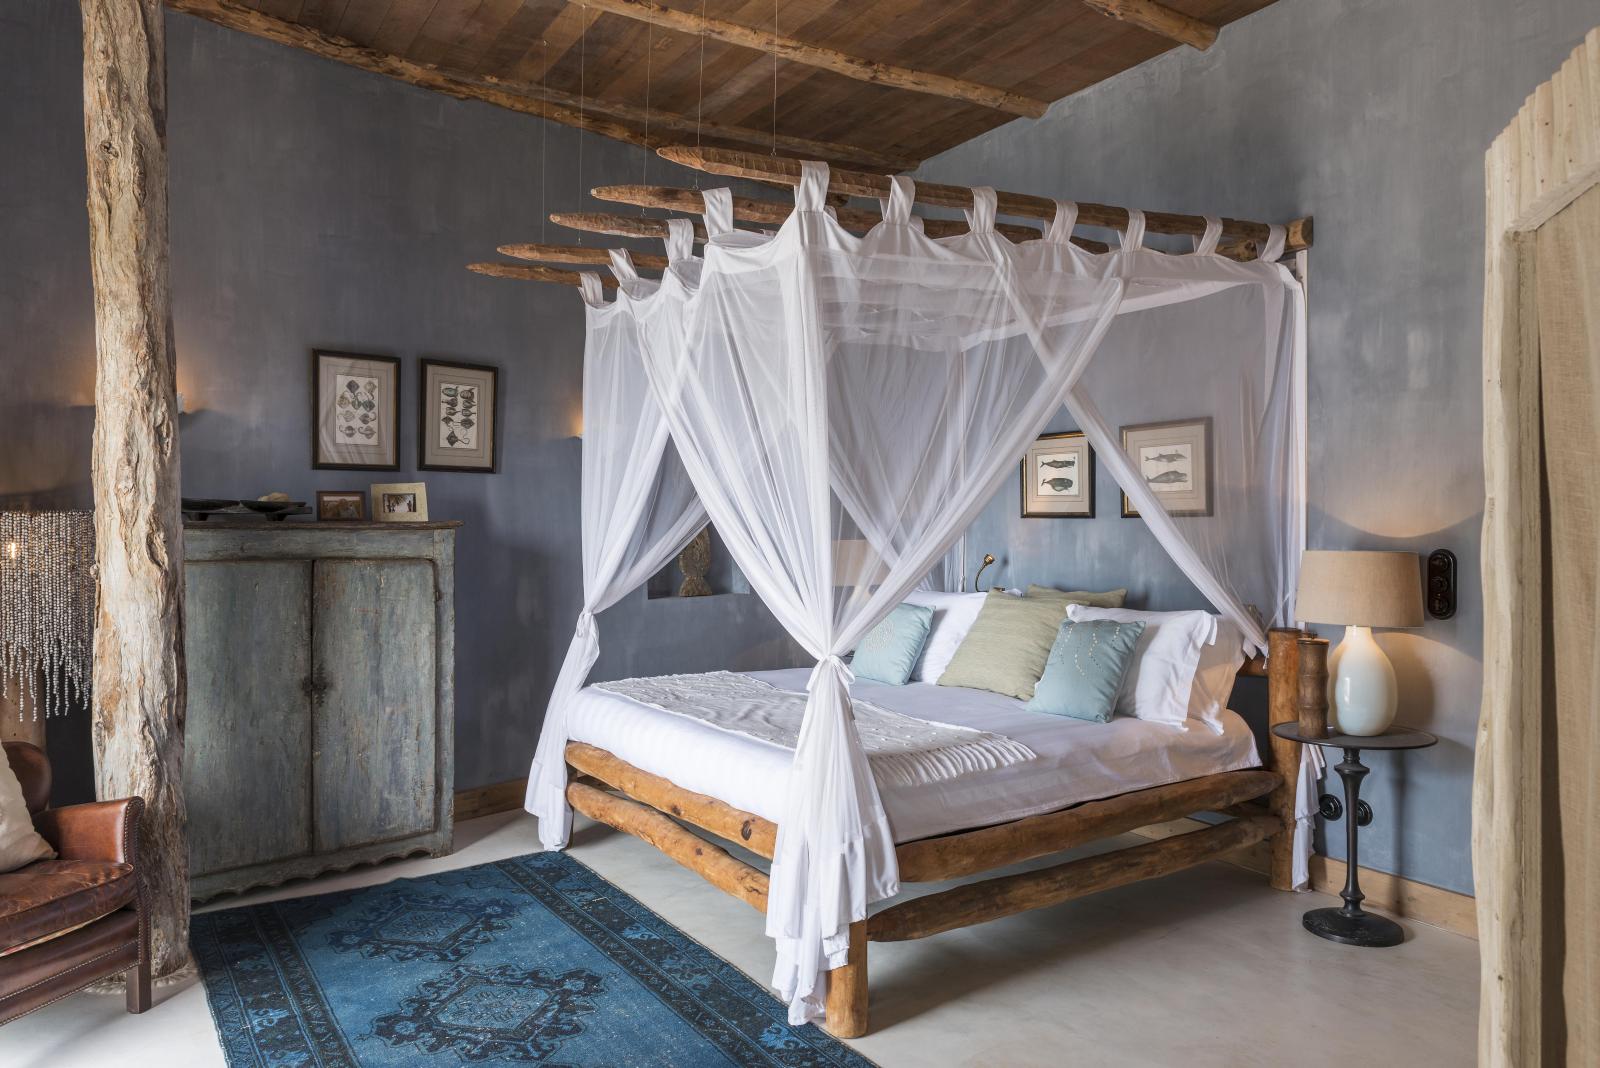 four poster bed in bedroom at luxury villa Colina Verde in Mozambique, Africa